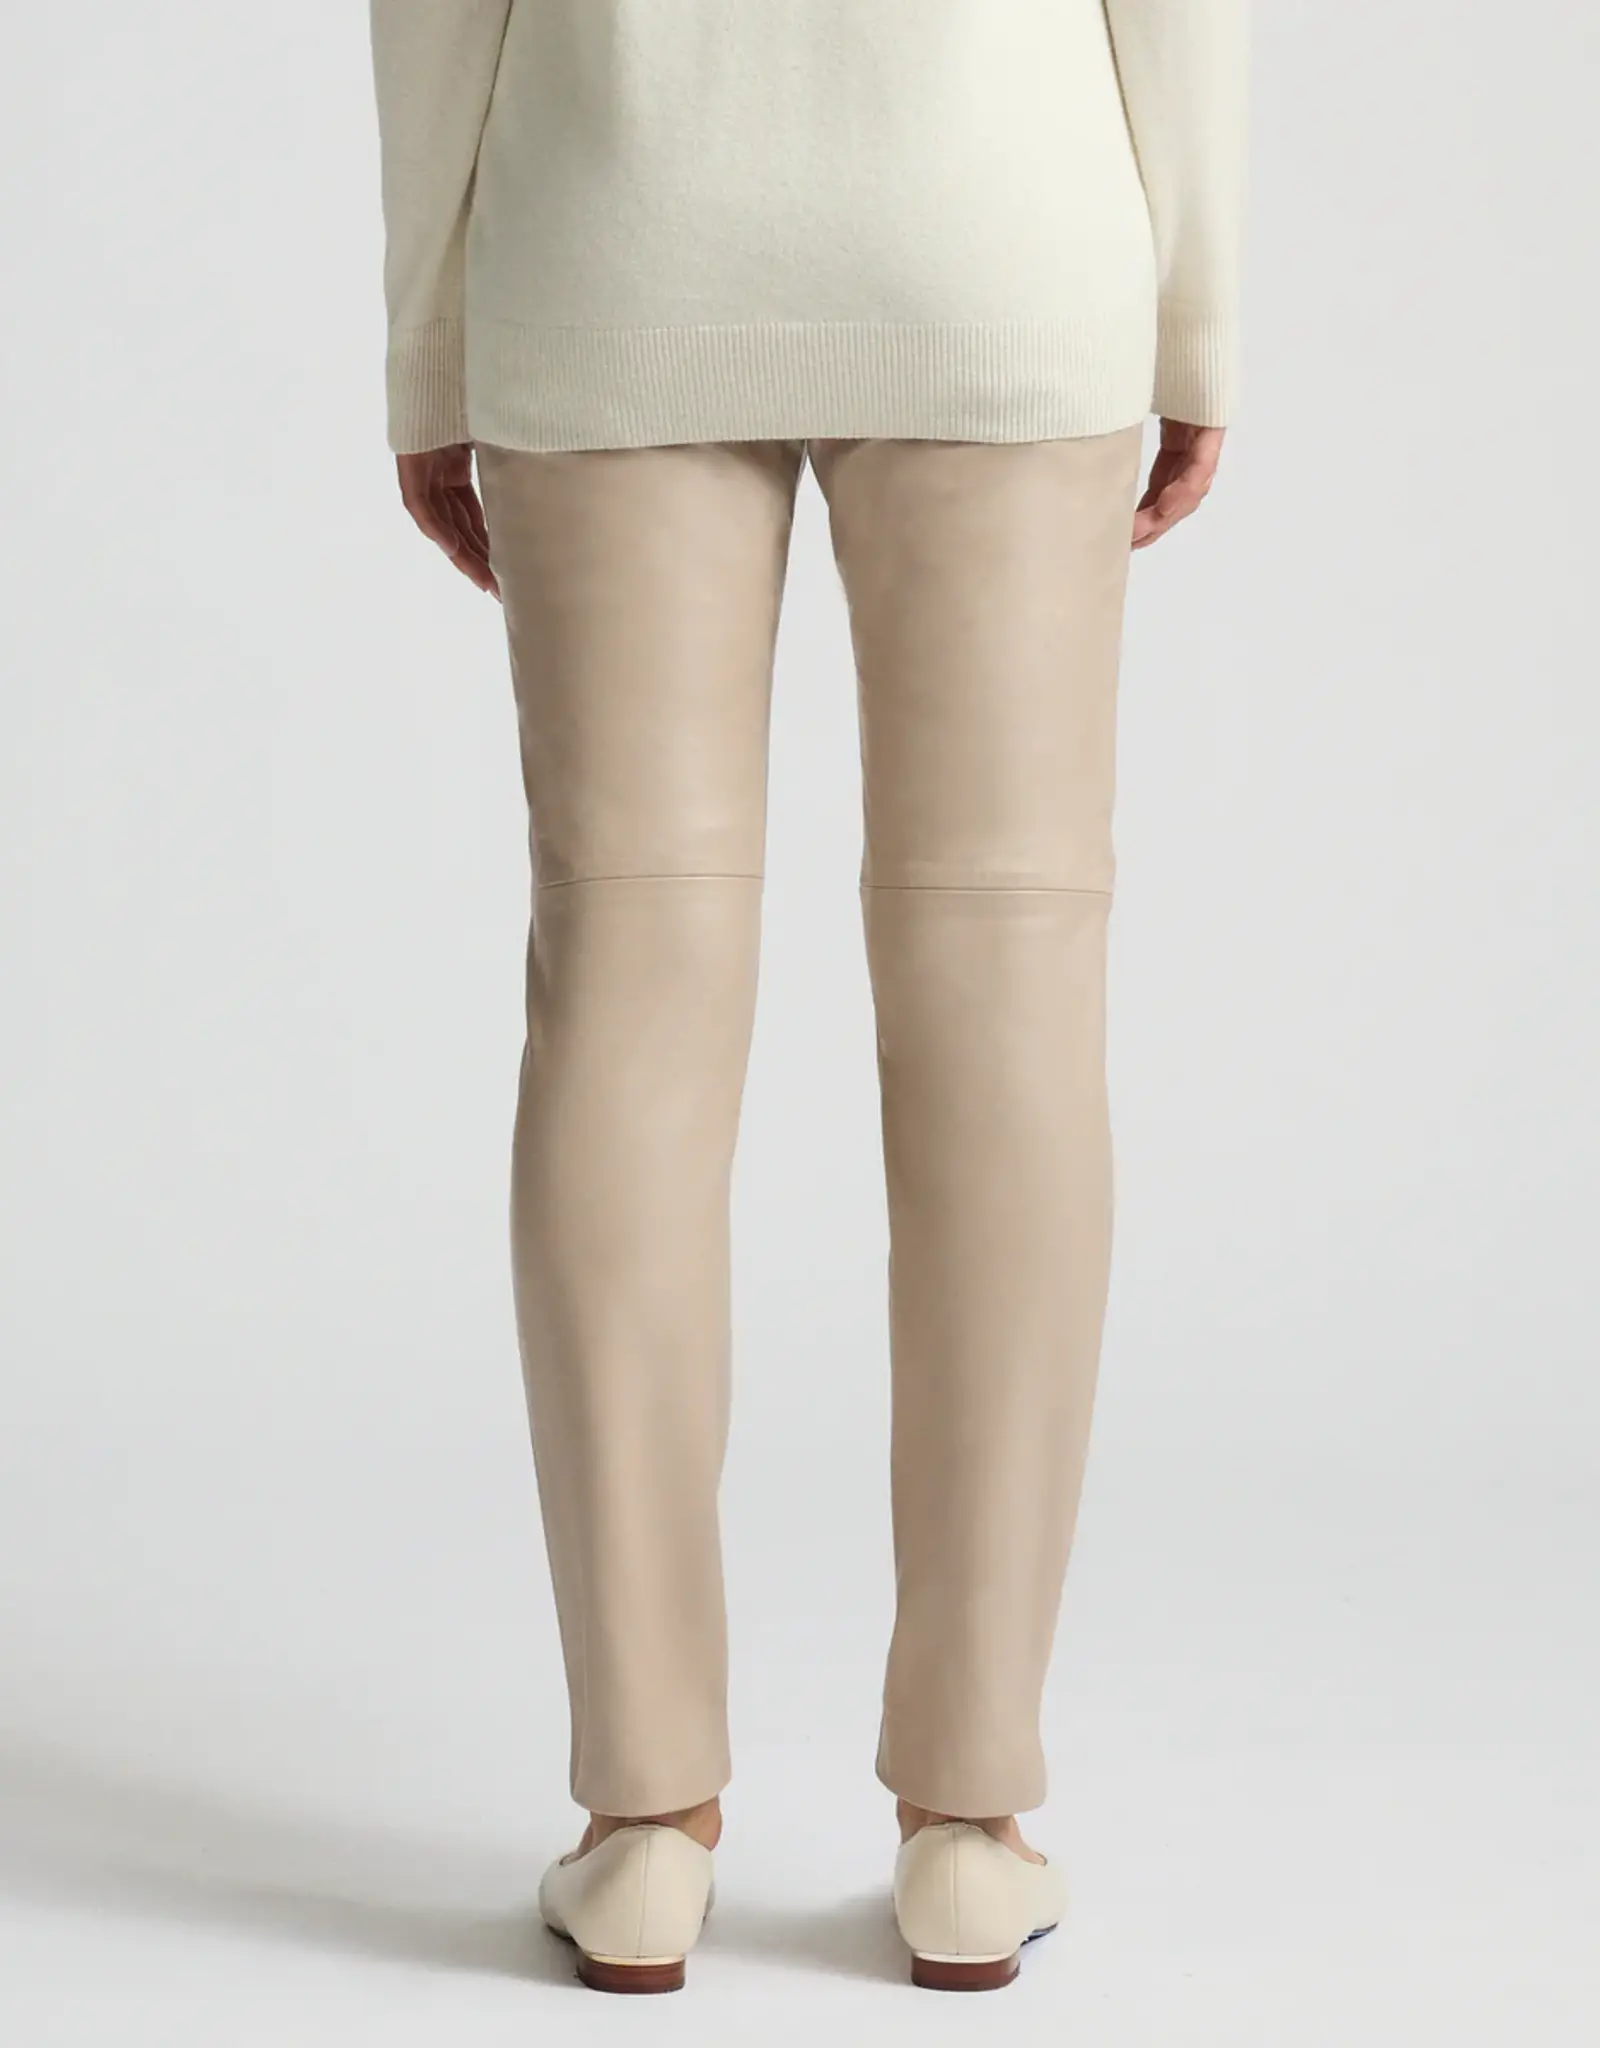 RAW BY RAW AVA LEATHER PANT CREME BRULEE